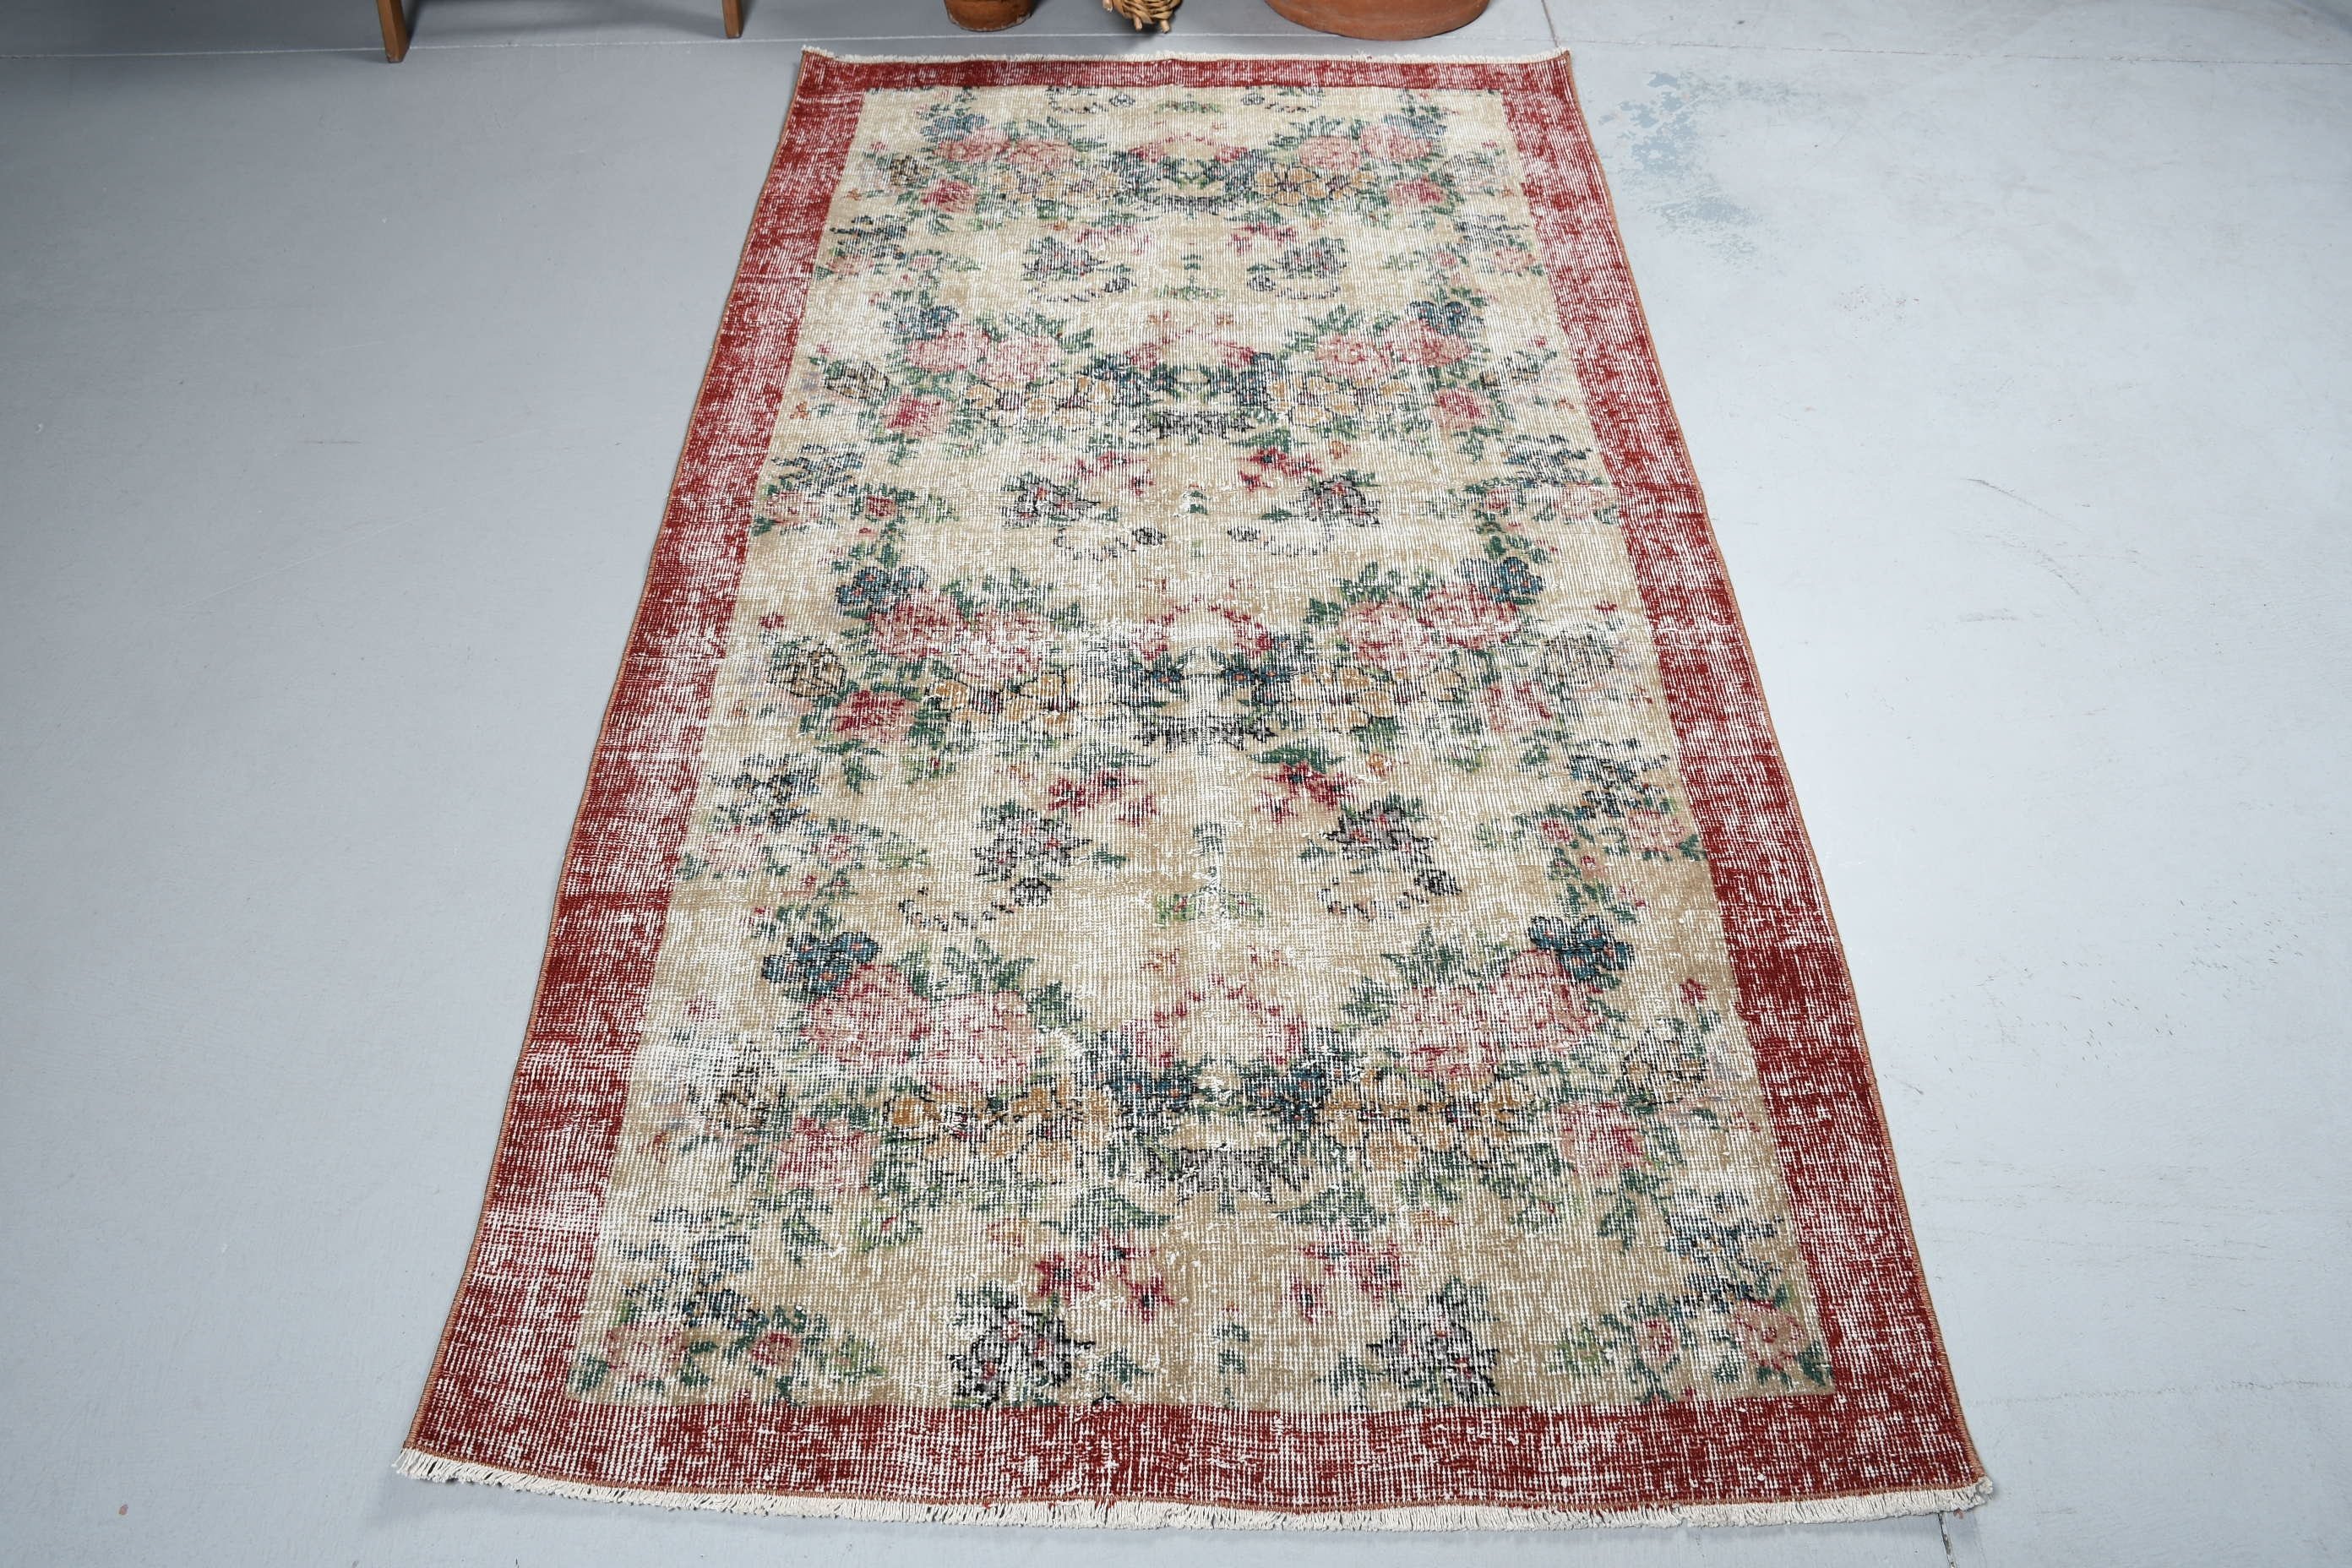 Turkish Rug, 3.6x6.6 ft Accent Rug, Bohemian Rug, Vintage Rugs, Red Moroccan Rugs, Home Decor Rug, Bedroom Rugs, Entry Rug, Kitchen Rug